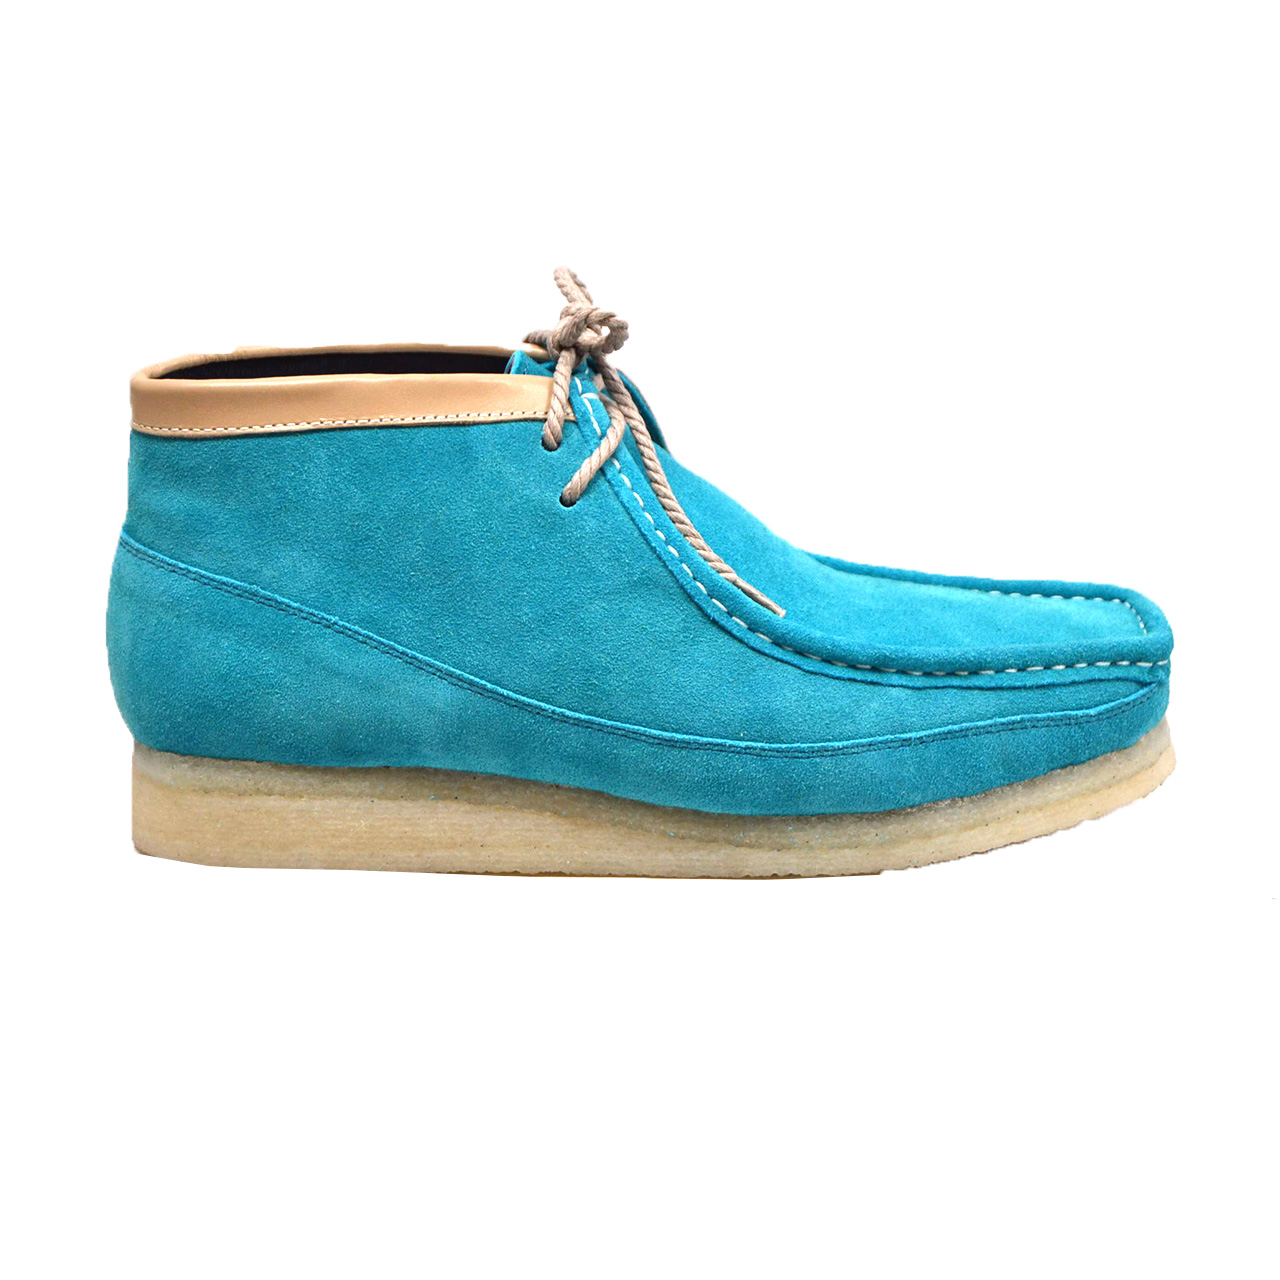 British Collection Walkers-Aqua Suede and Leather [100200-5] - $180.00 ...